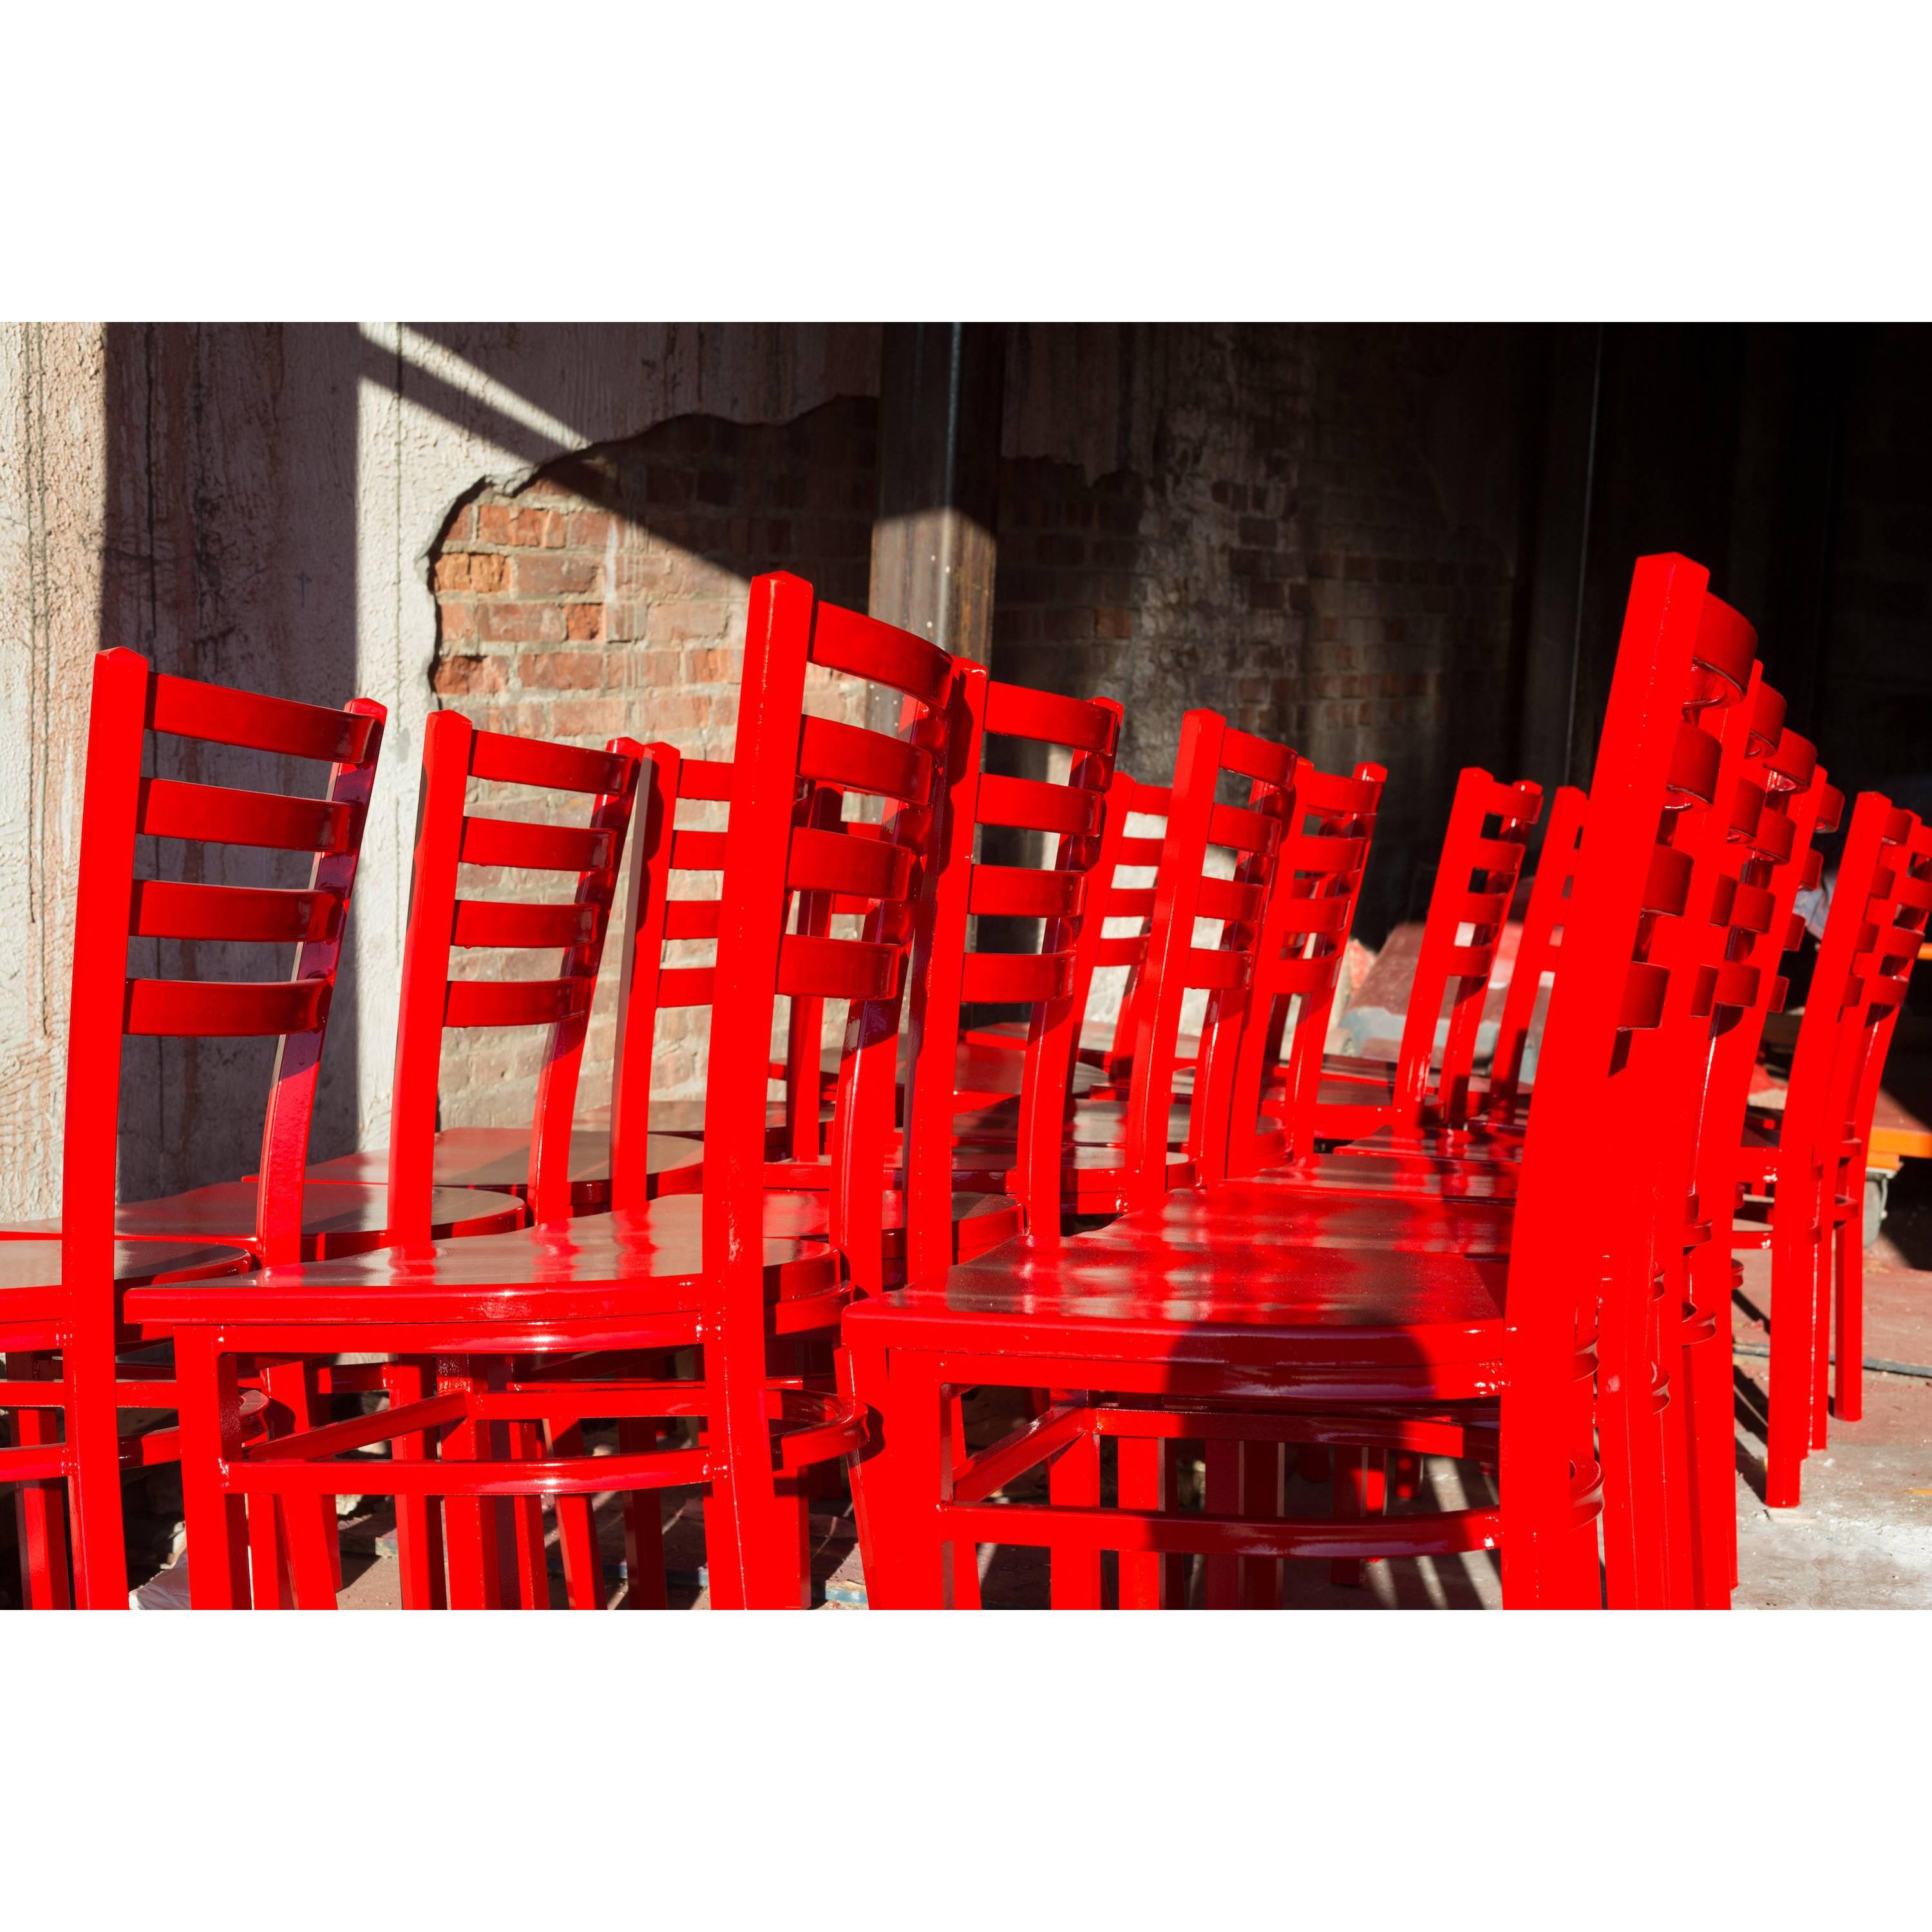 Red Chairs/Photography